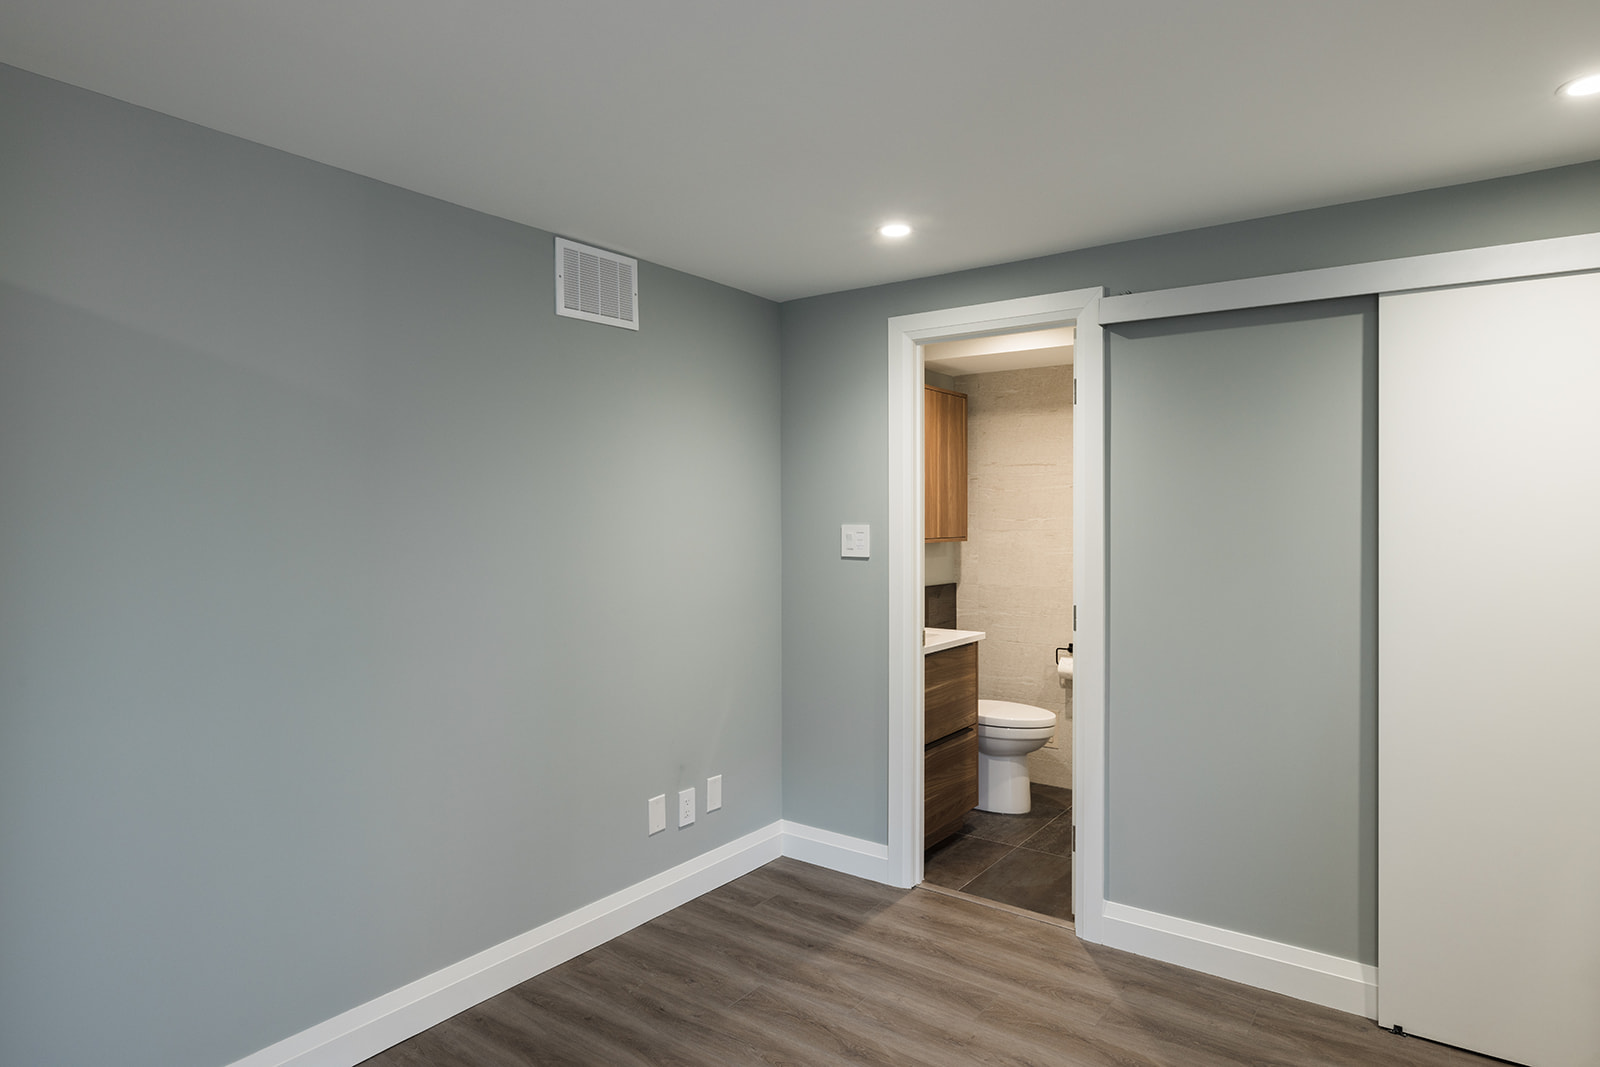 Full condo renovation in downtown Toronto with recessed lighting and LVP flooring